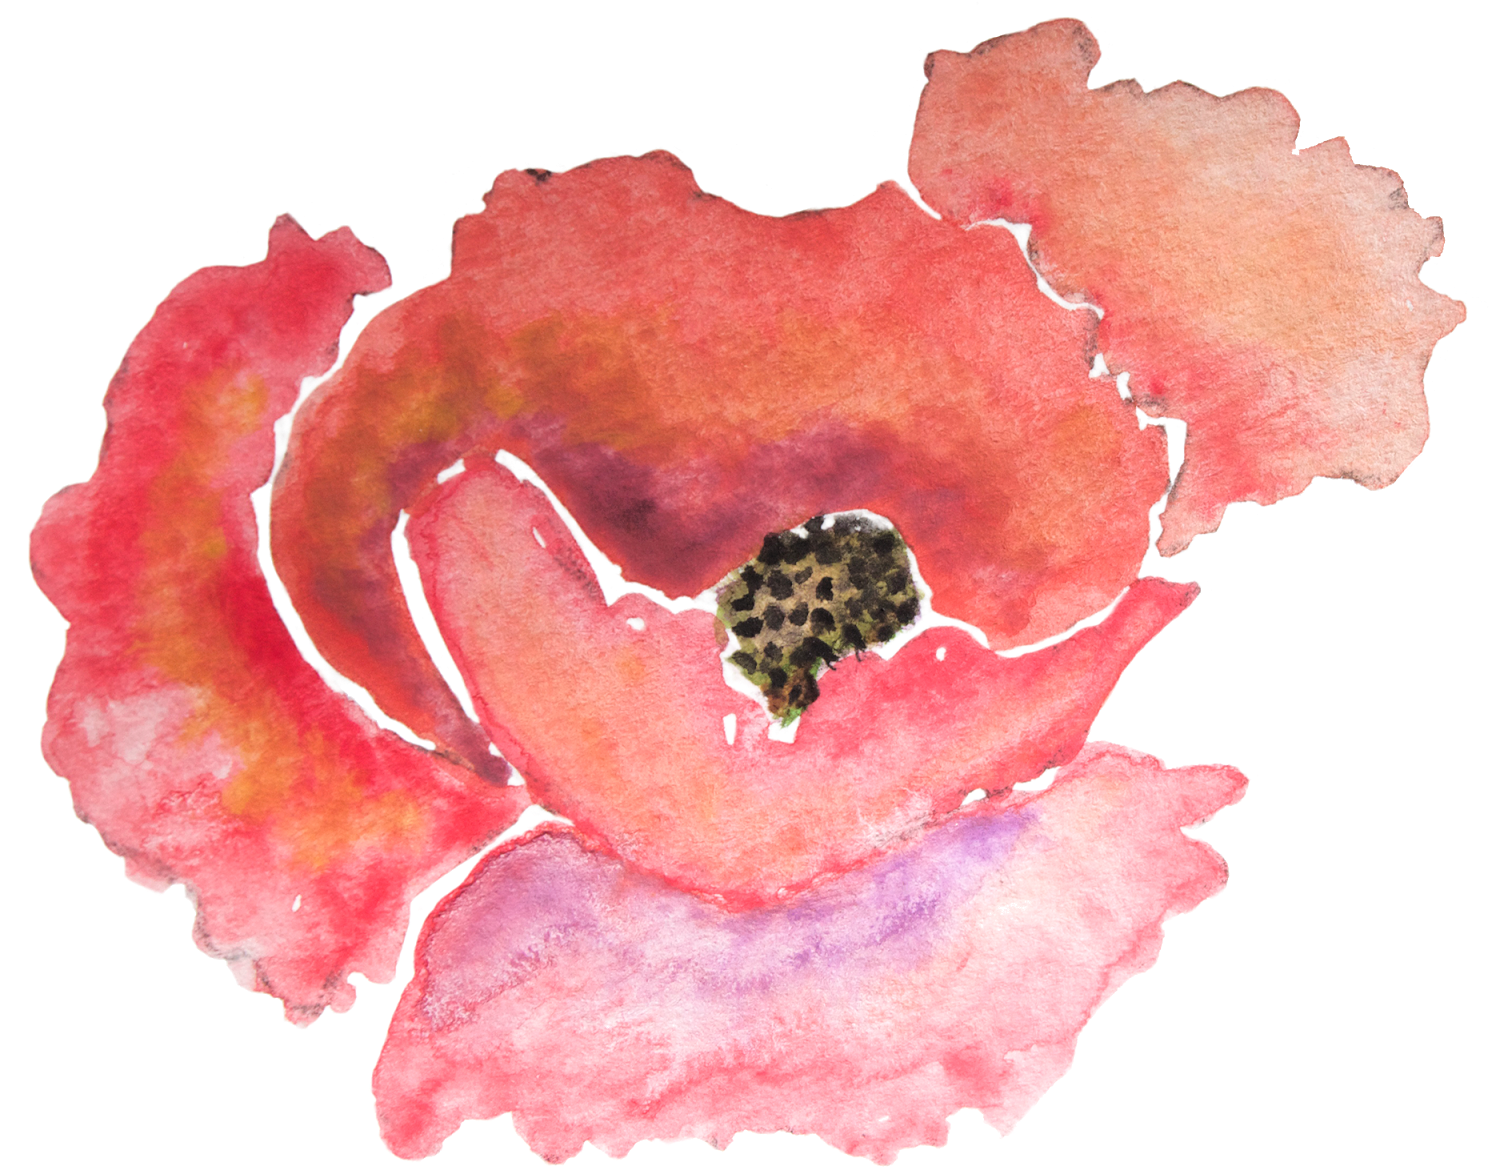 Paper Poppy Watercolor Painting Flower Zazzle - Reserved Listing For Janine (1600x1249)